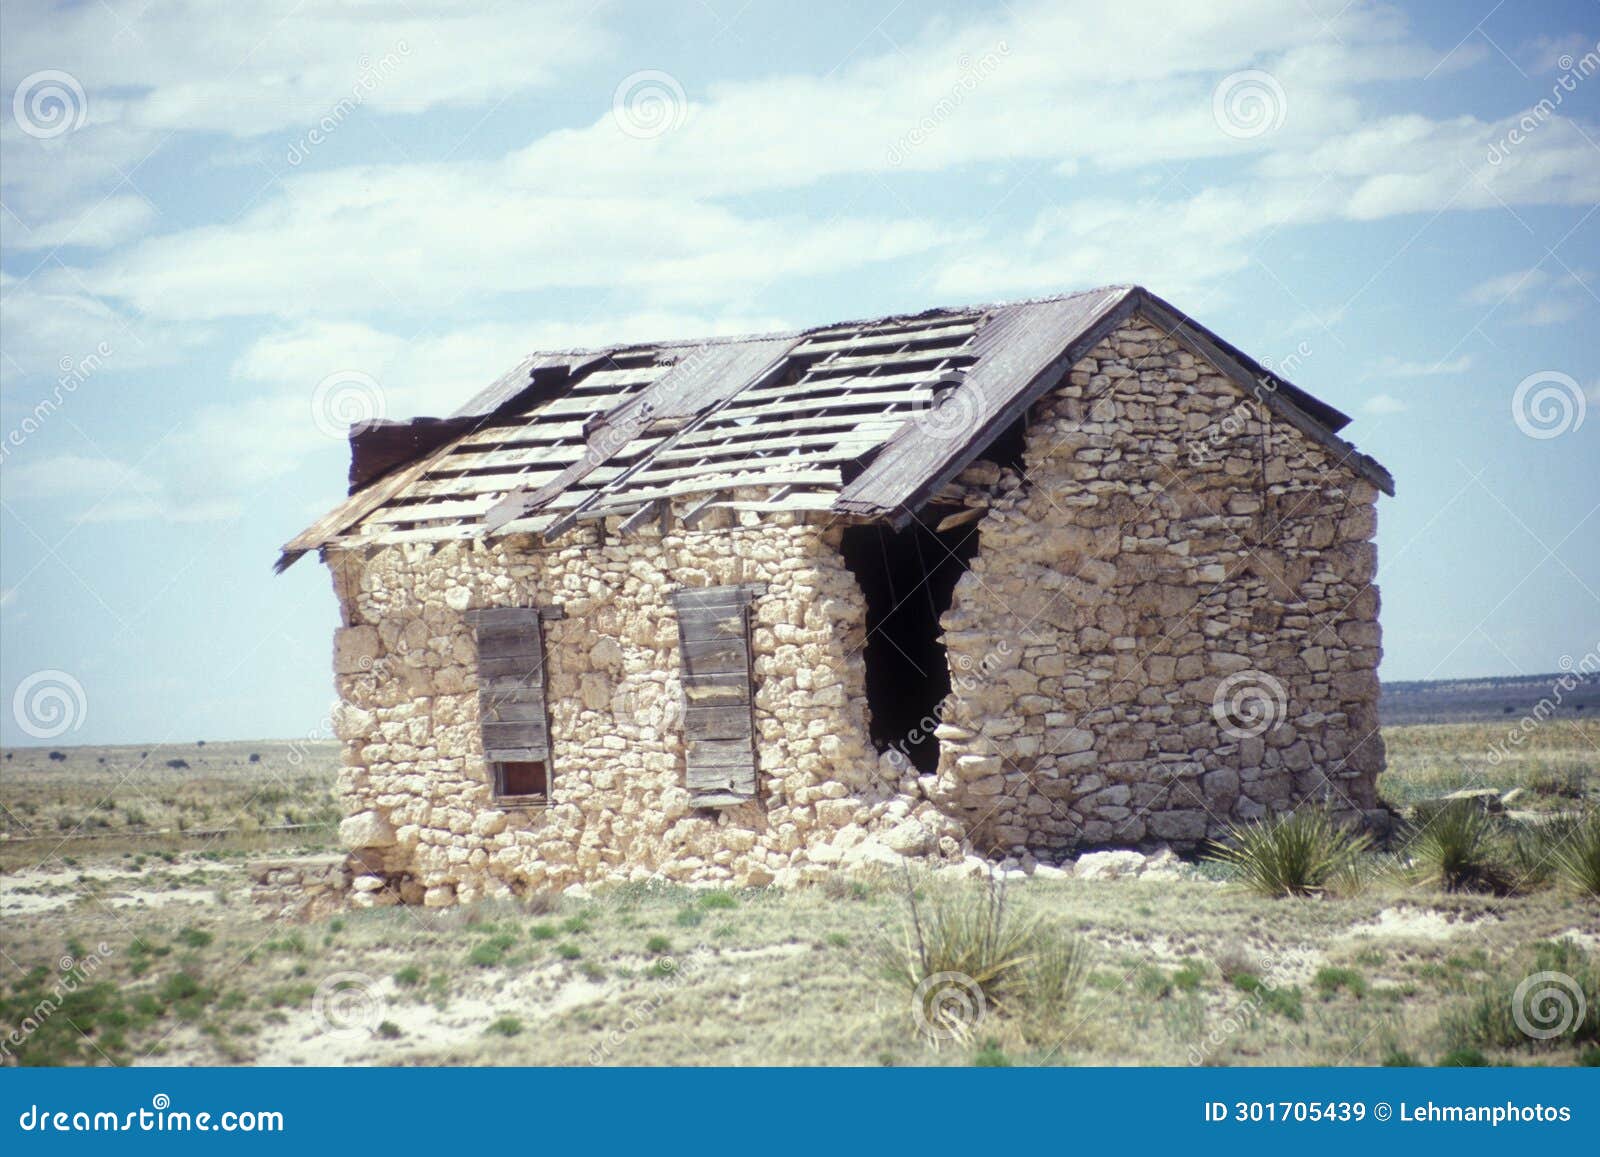 new mexico stone cabin collapsing